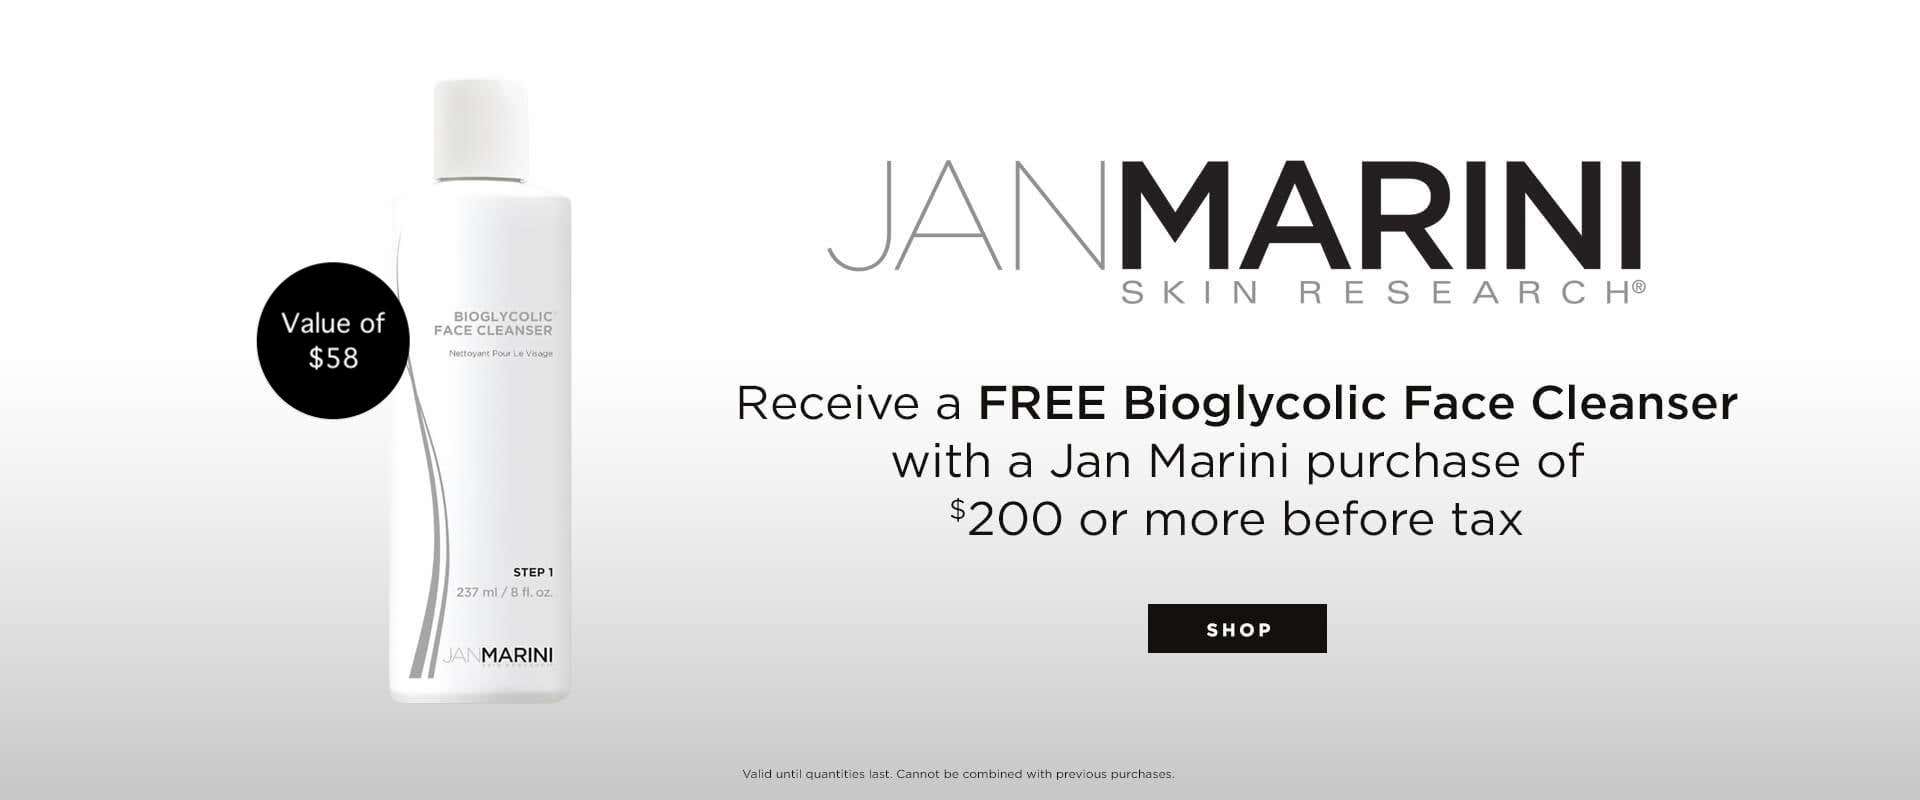 Receive a FREE Bioglycolic Face Cleanser when you purchase $200 or more of Jan Marini products.